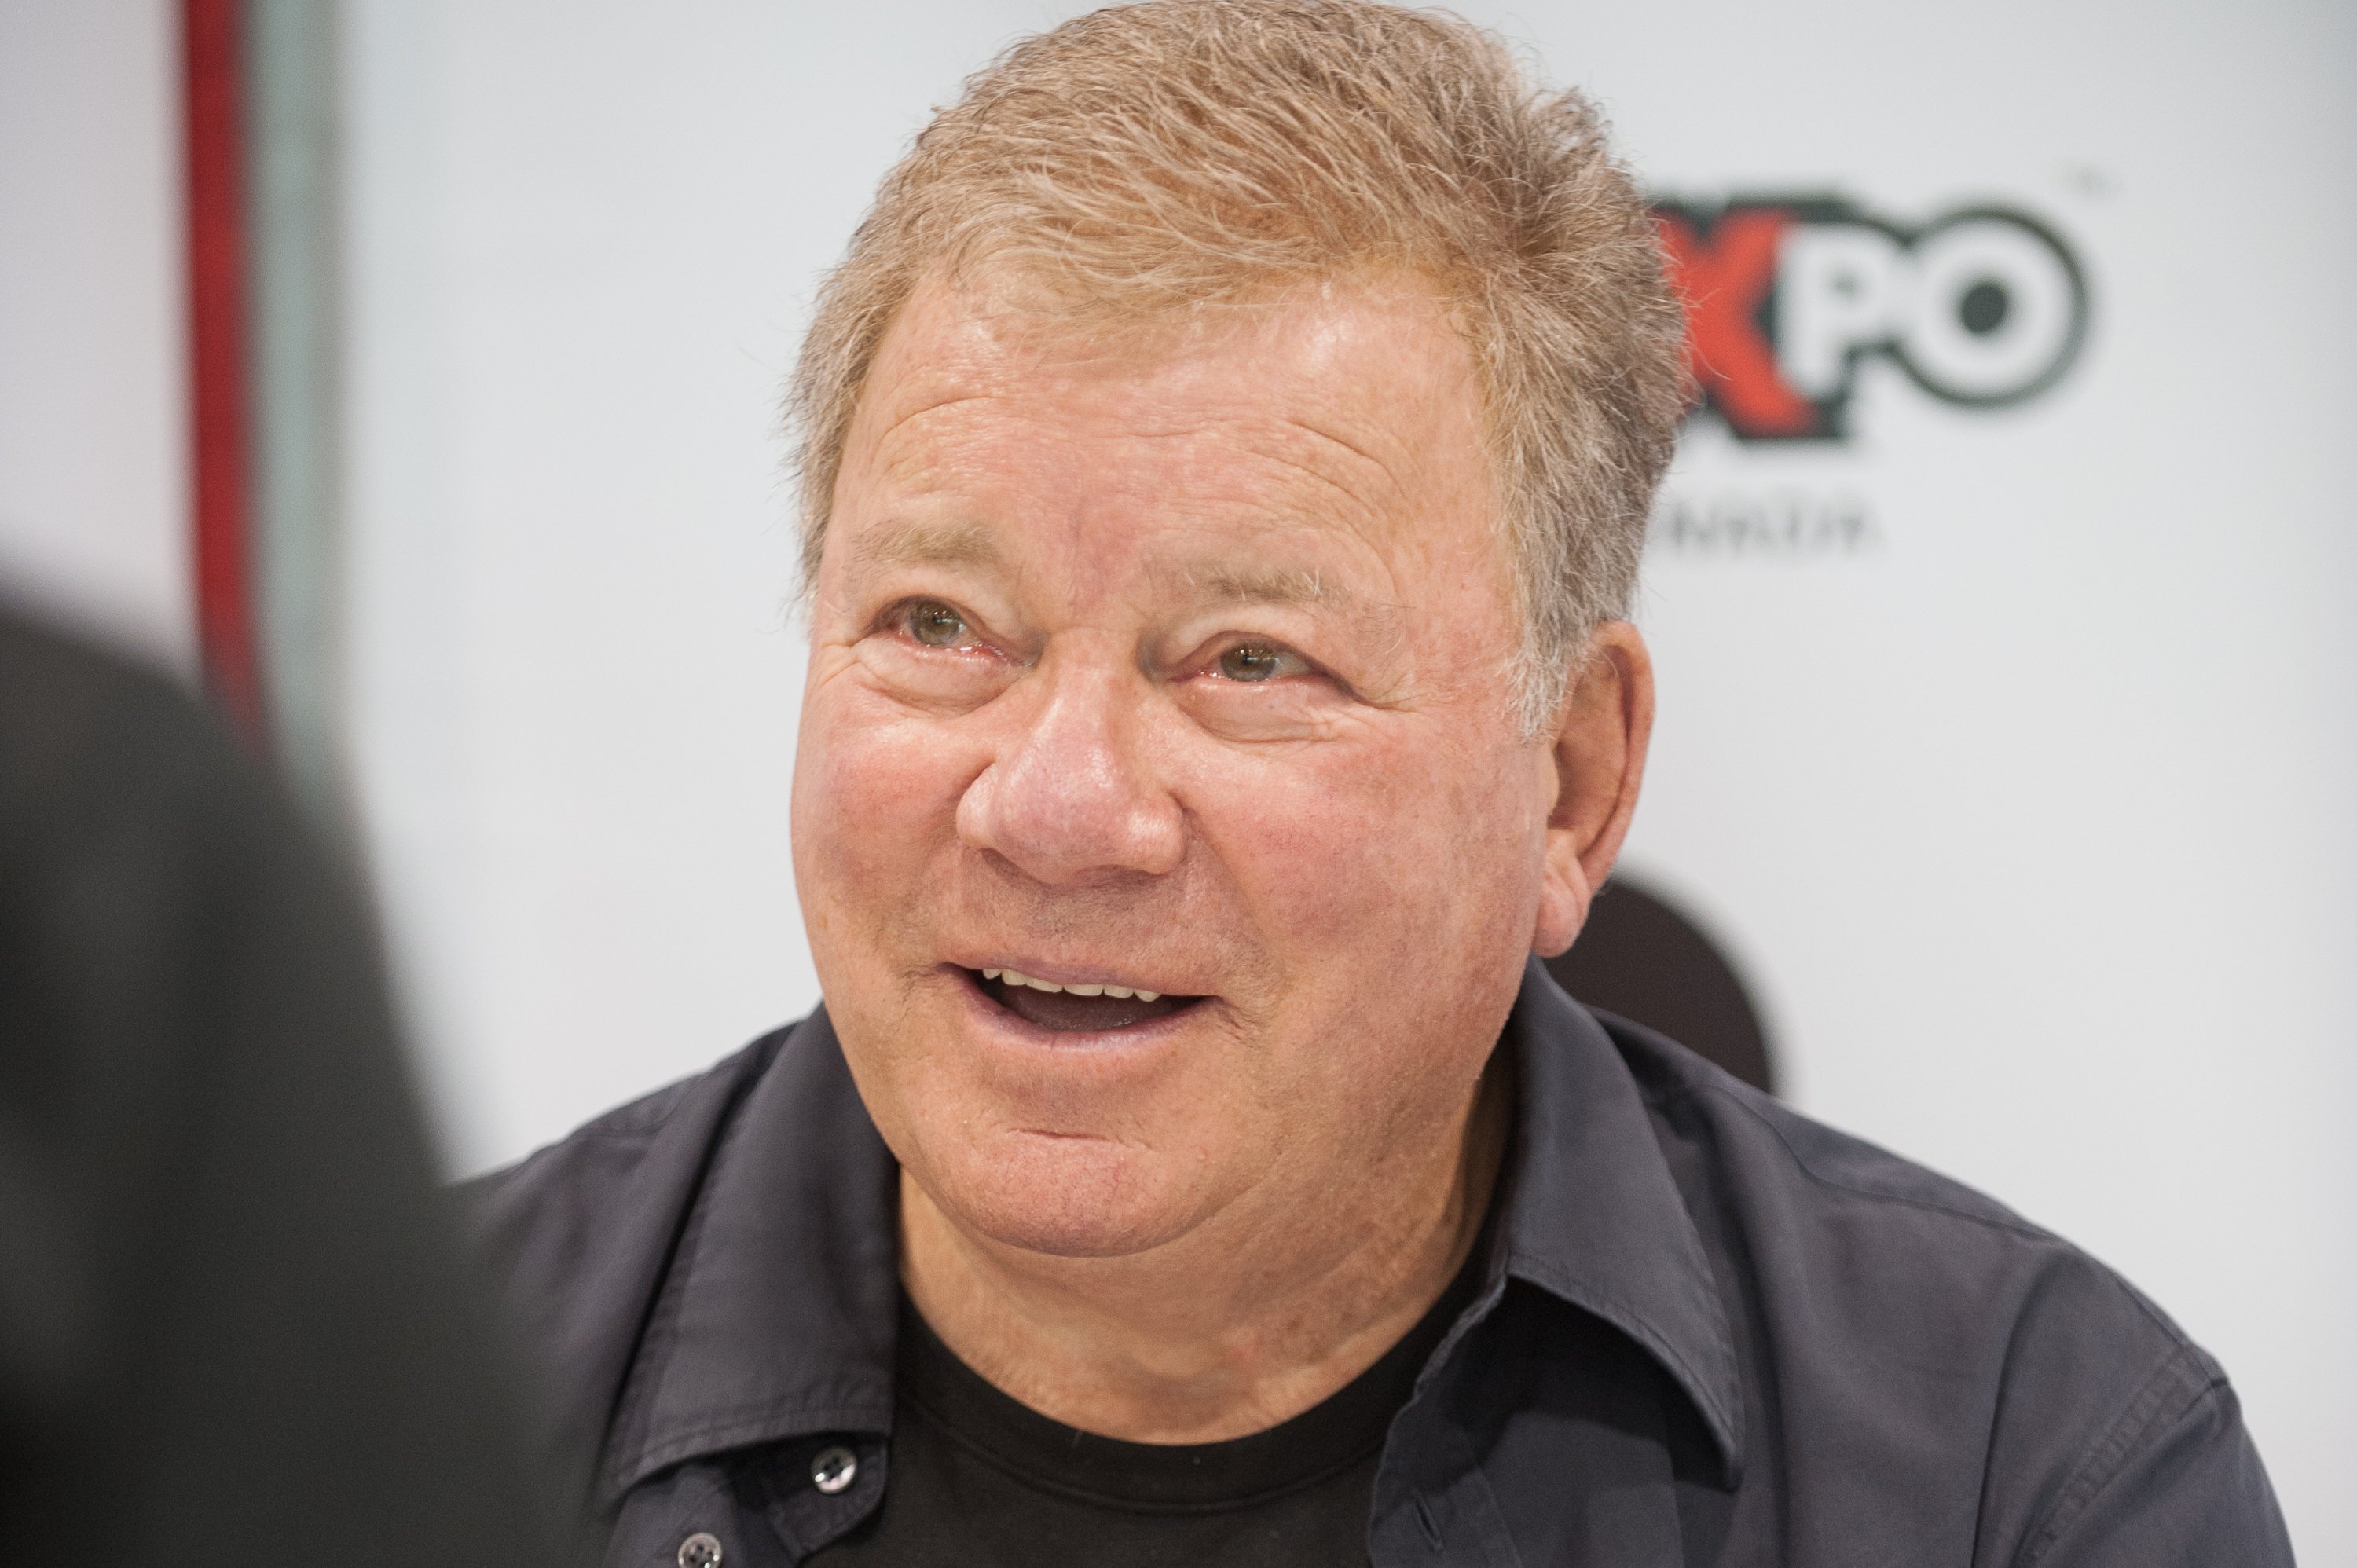 William Shatner talking to press in Canada. The shot is a close-up of his face.